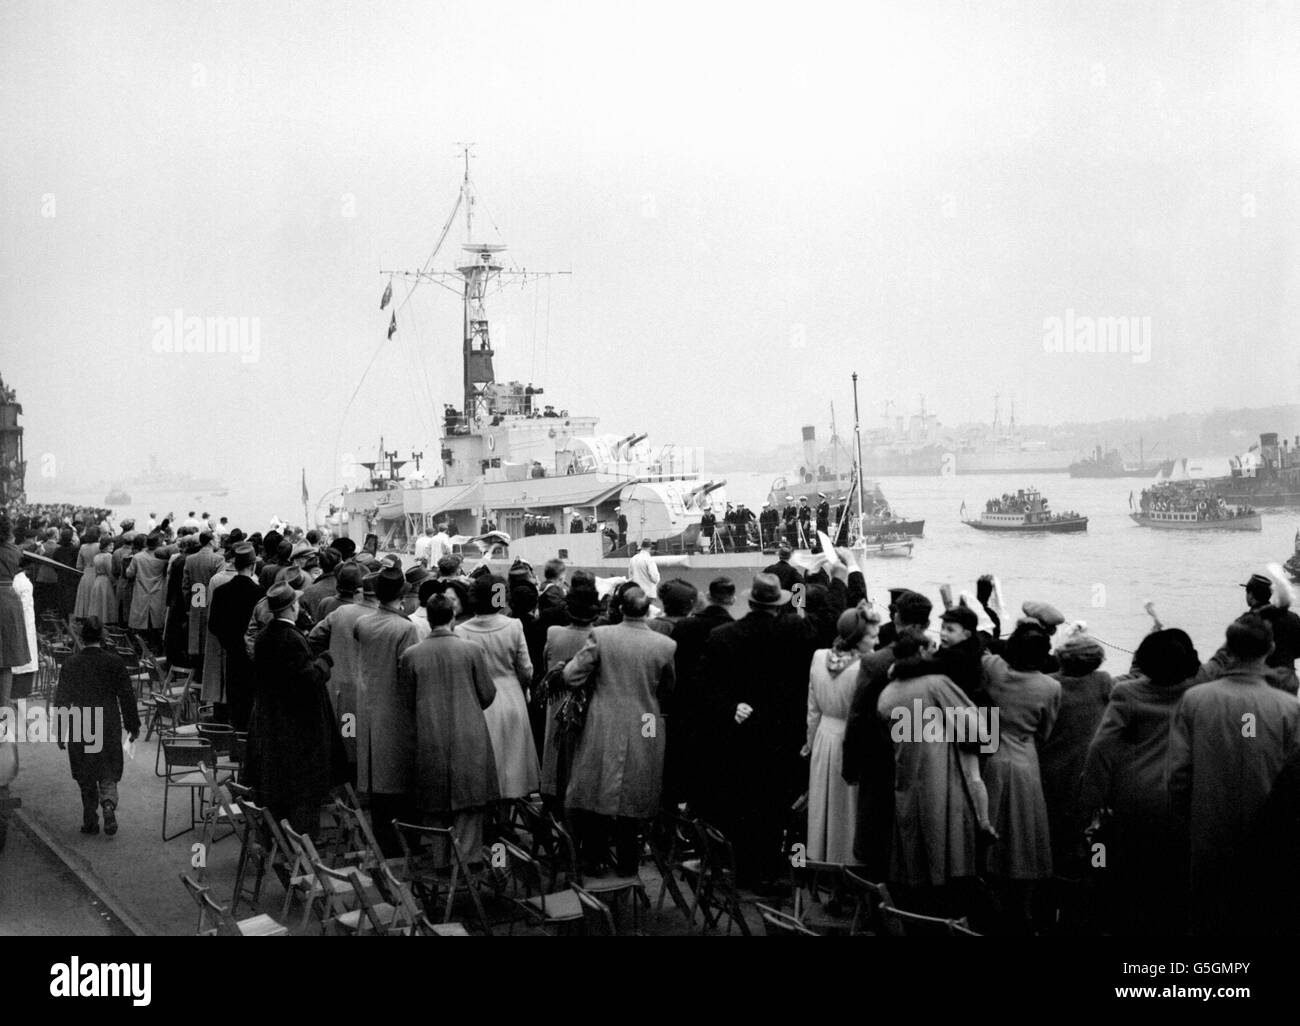 British Armed Forces - The Royal Navy - The Yangtse Incident - Devonport - 1945 Stock Photo